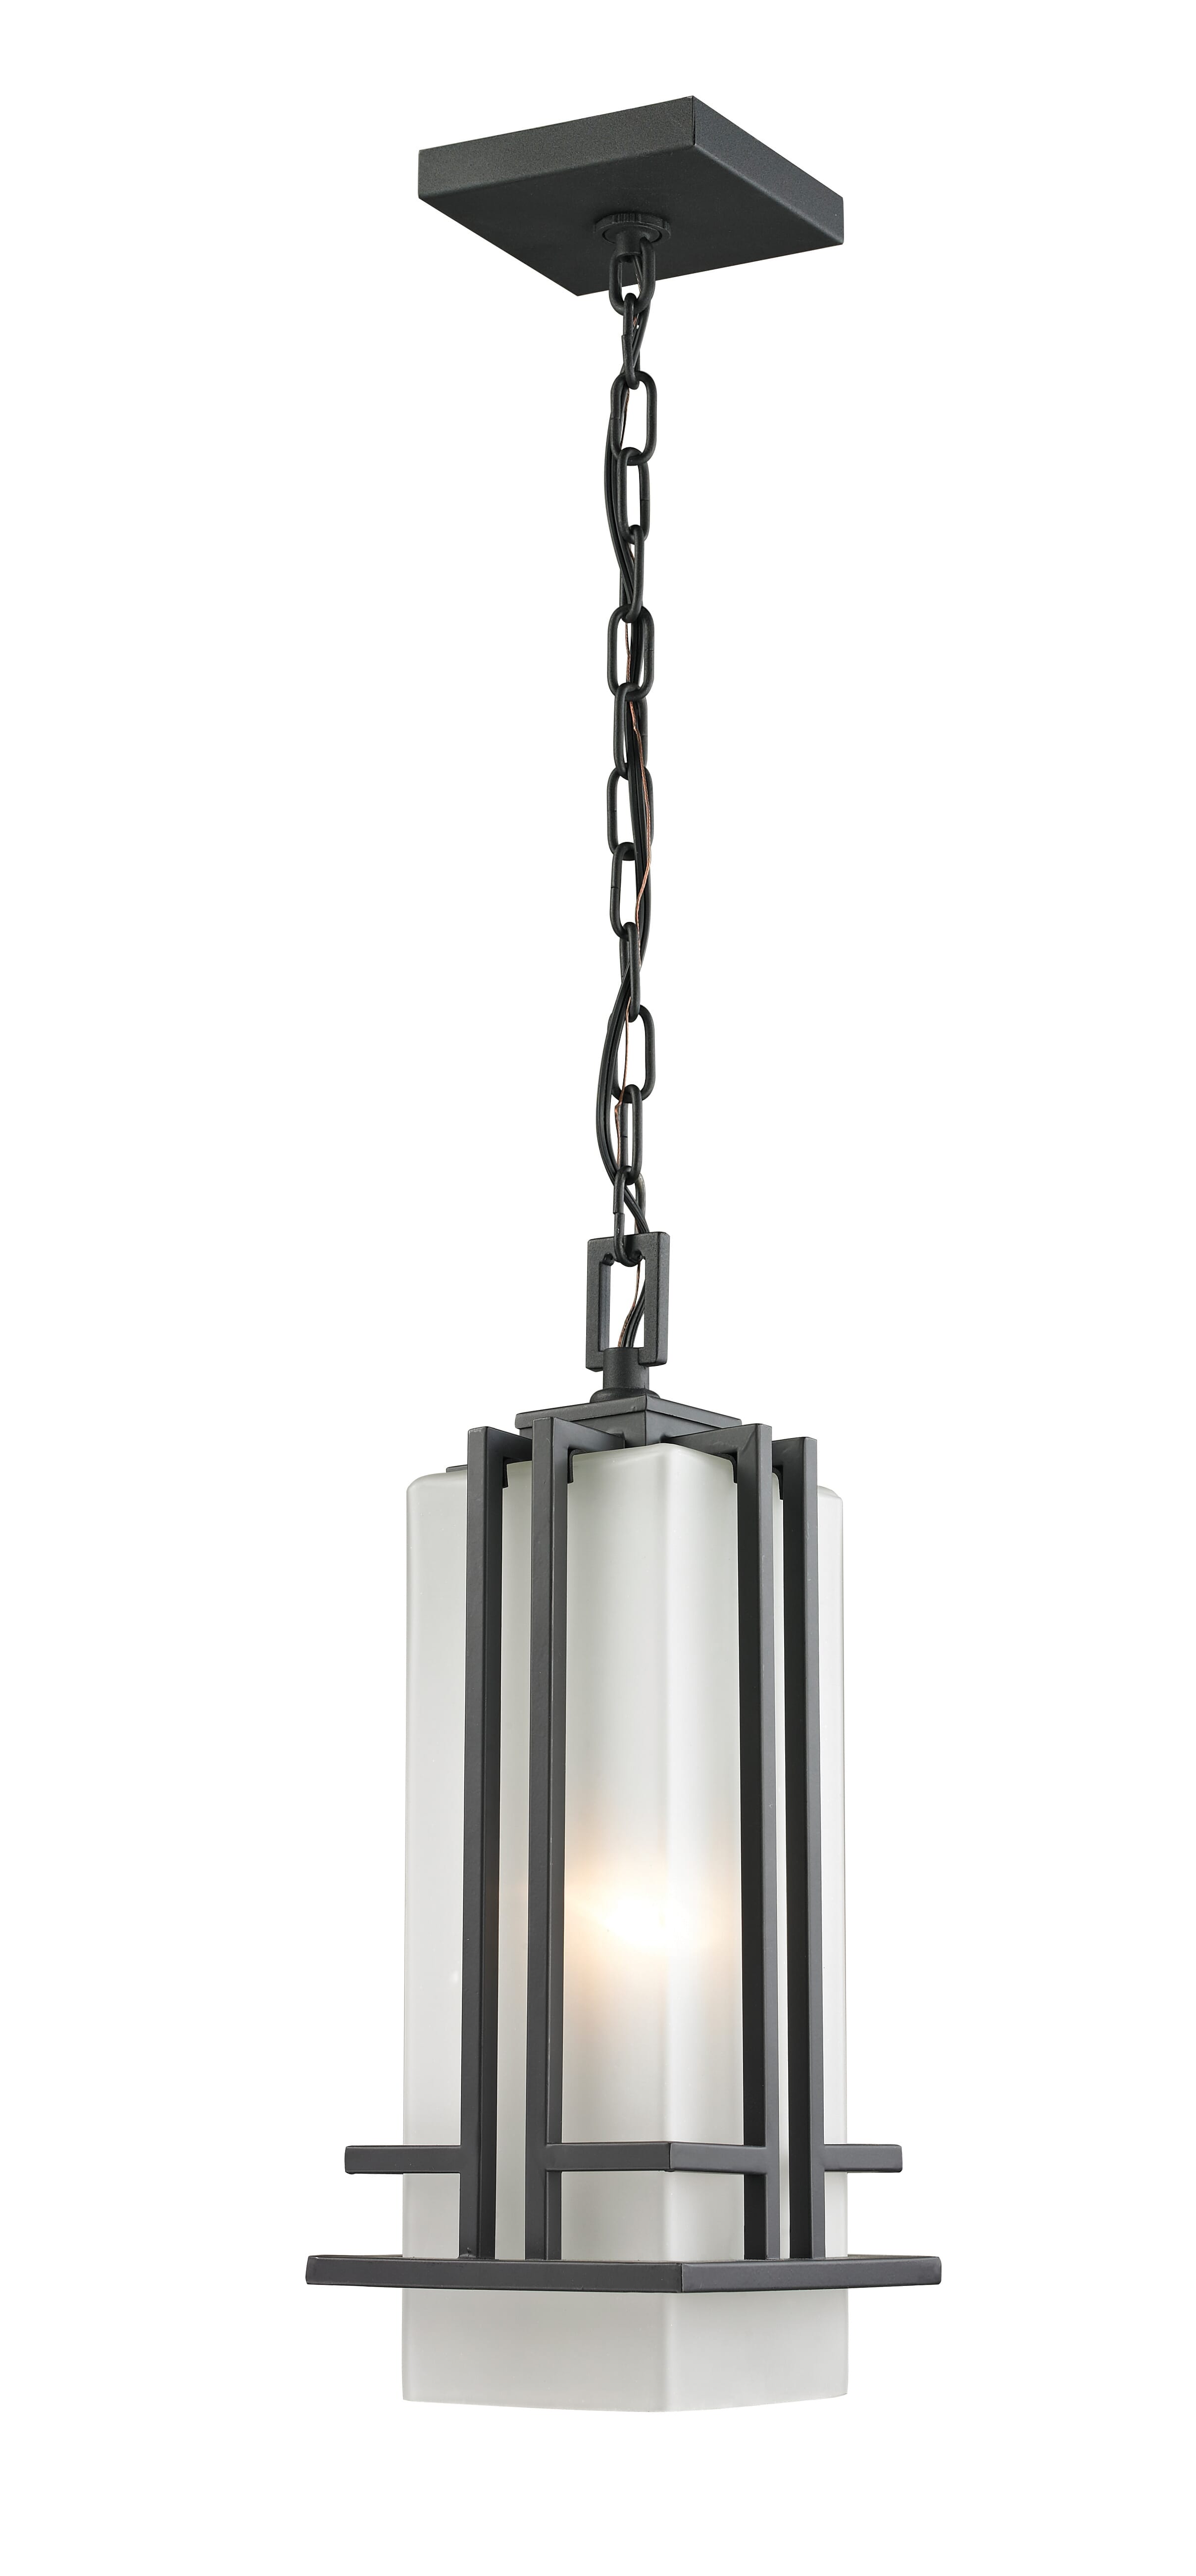 Abbey 1-Light Outdoor Chain Mount Ceiling Fixture Light In Outdoor Rubbed Bronze